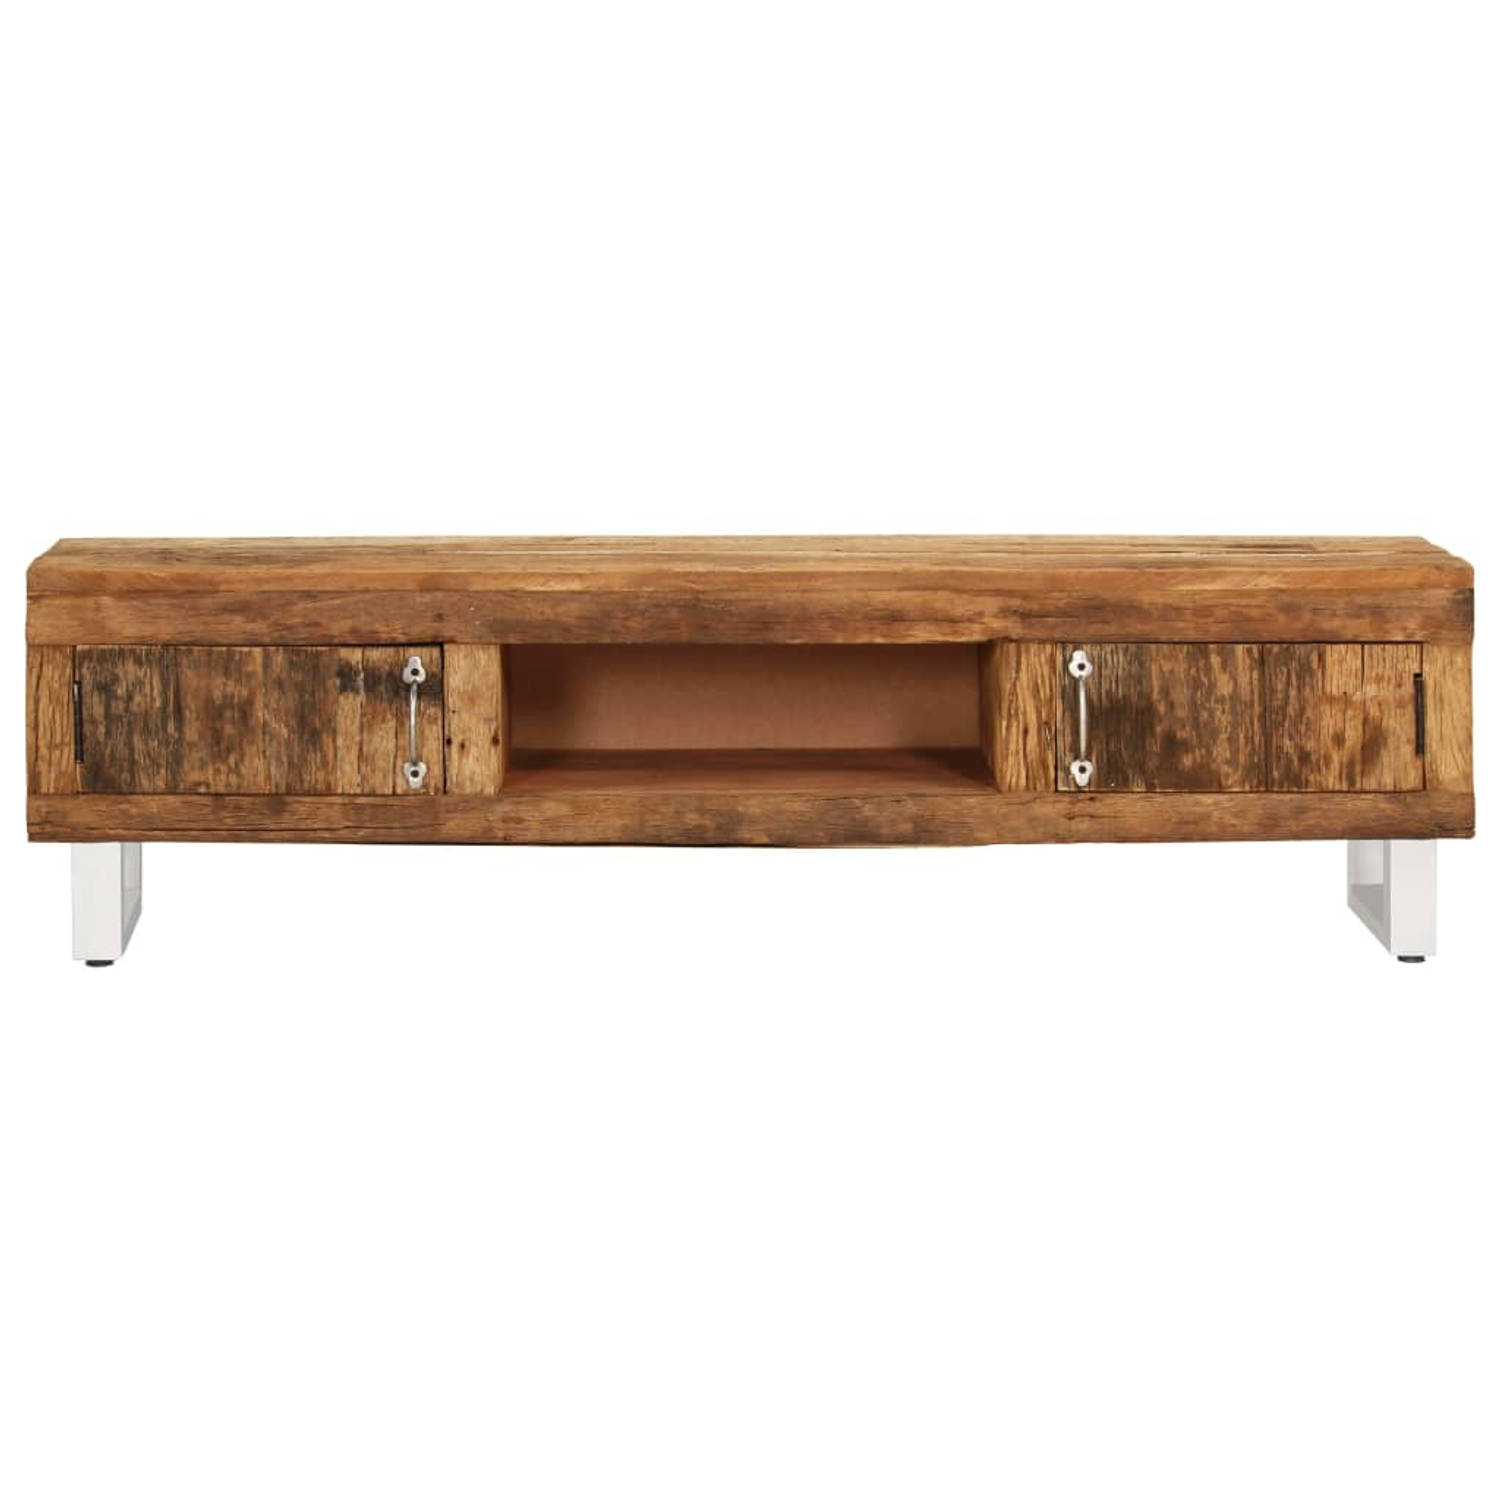 The Living Store TV-meubel Retro Hout 140x30x40 cm Massief gerecycled hout 2 deuren The Living Store